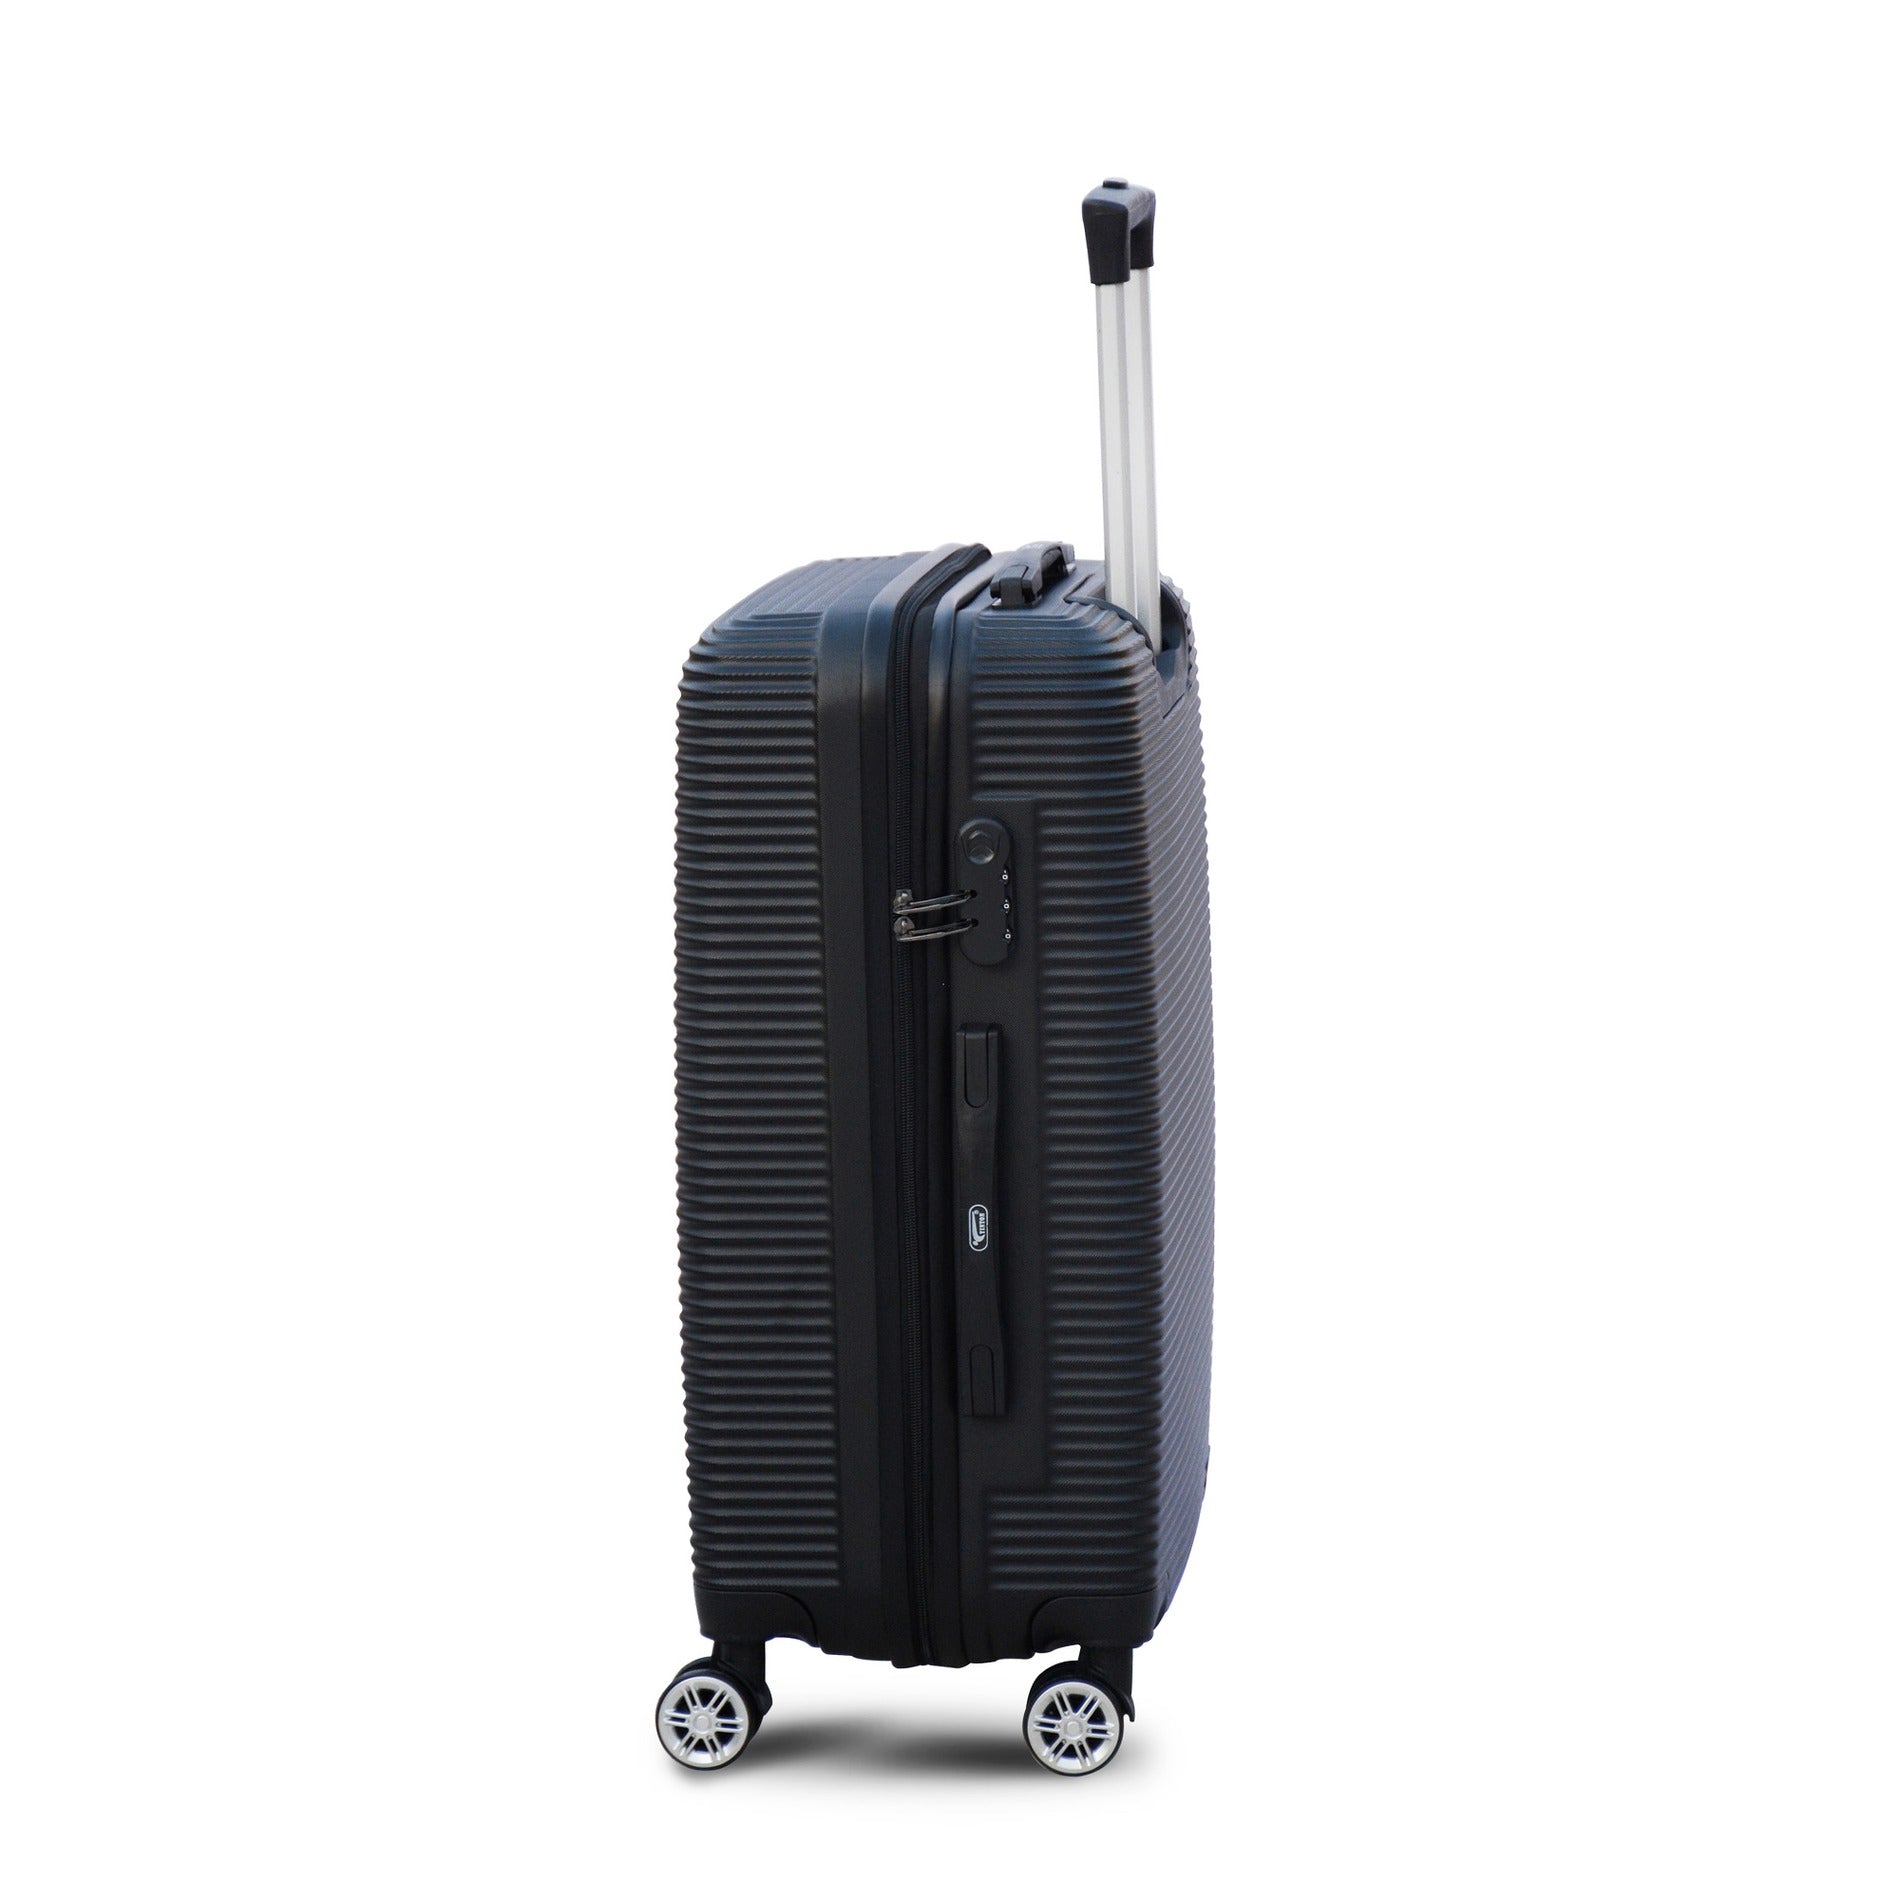 24" Black Colour JIAN ABS Line Luggage Lightweight Hard Case Trolley Bag With Spinner Wheel